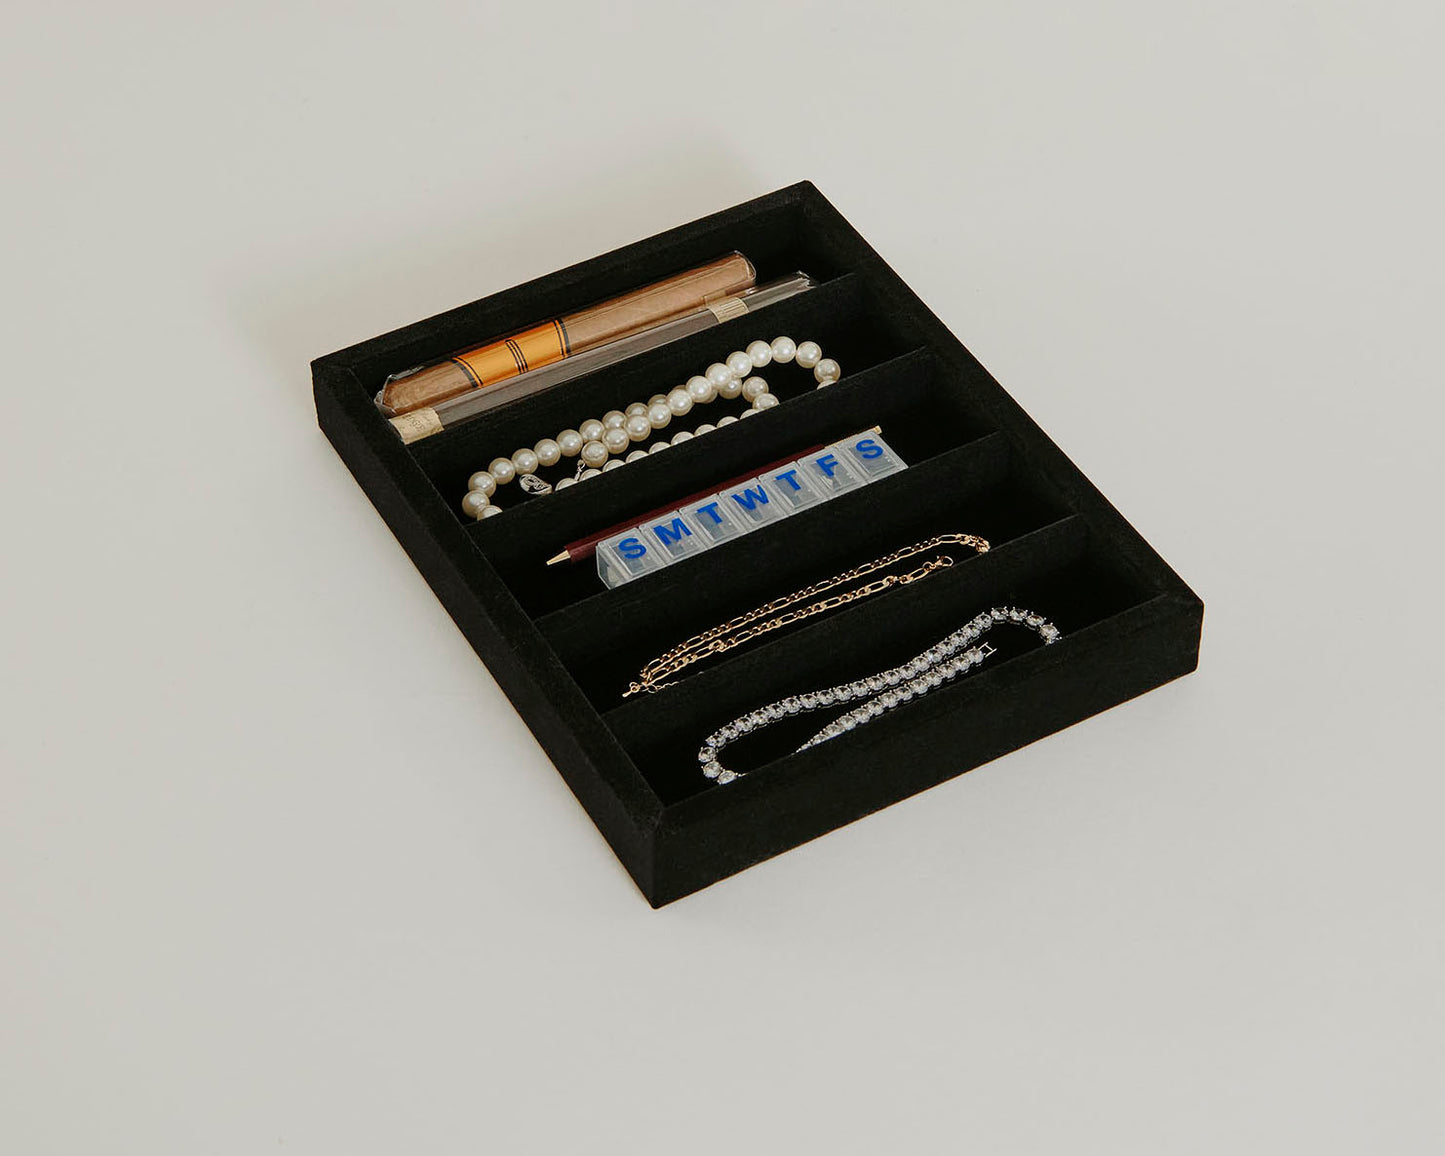 A black 6V tray with jewelry, medicine, and a cigar sitting within the tray